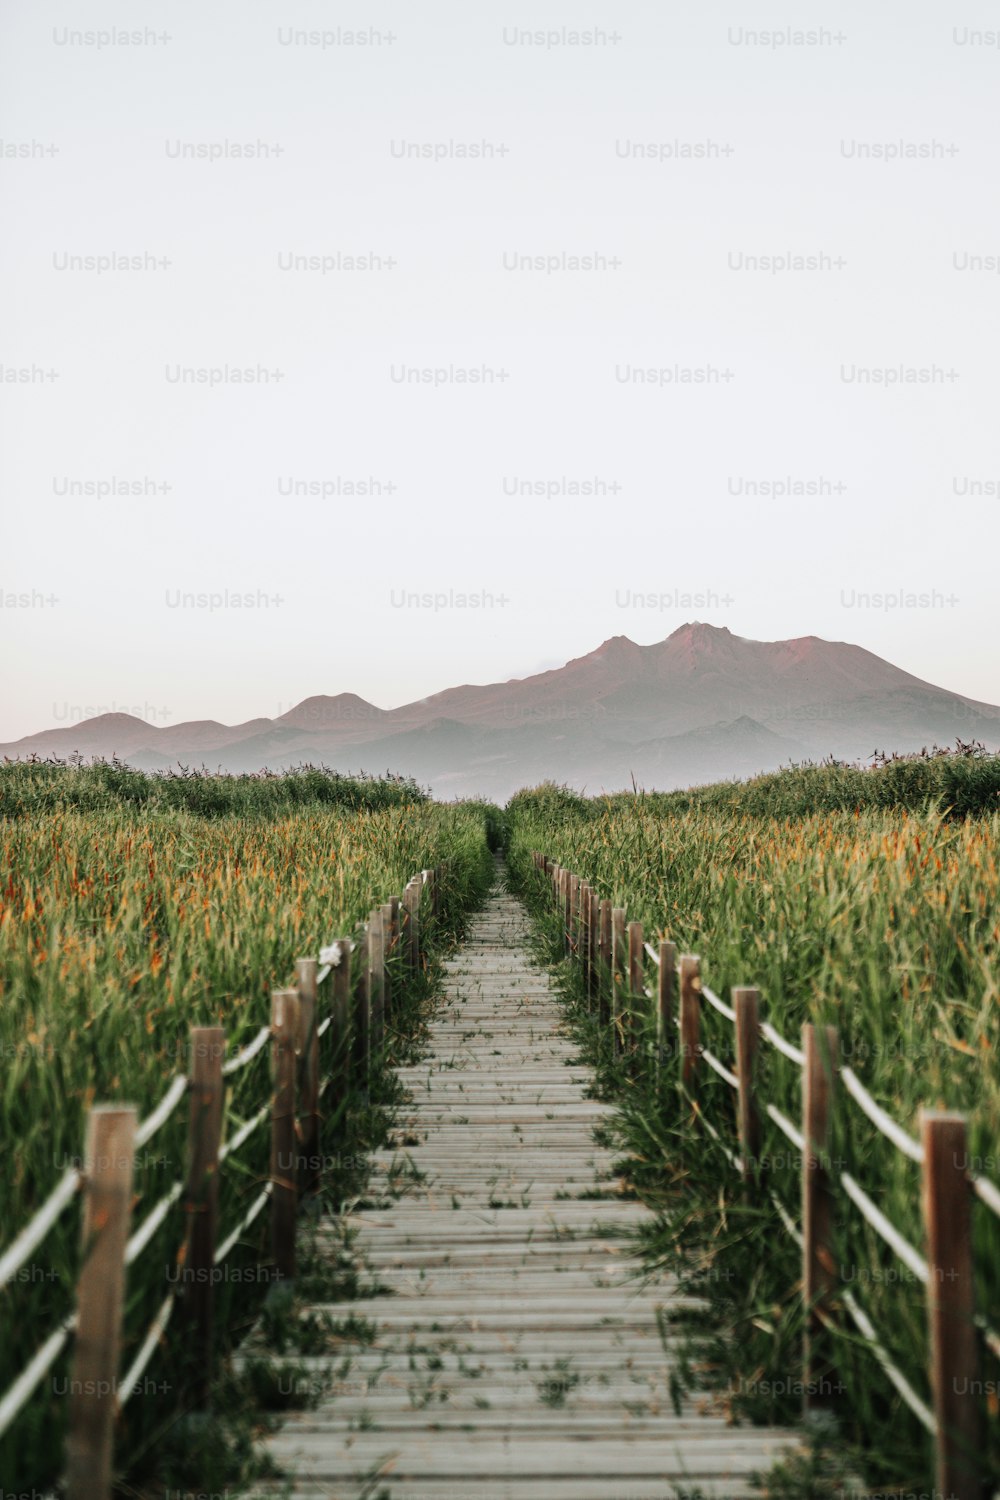 a wooden path in a field with mountains in the background